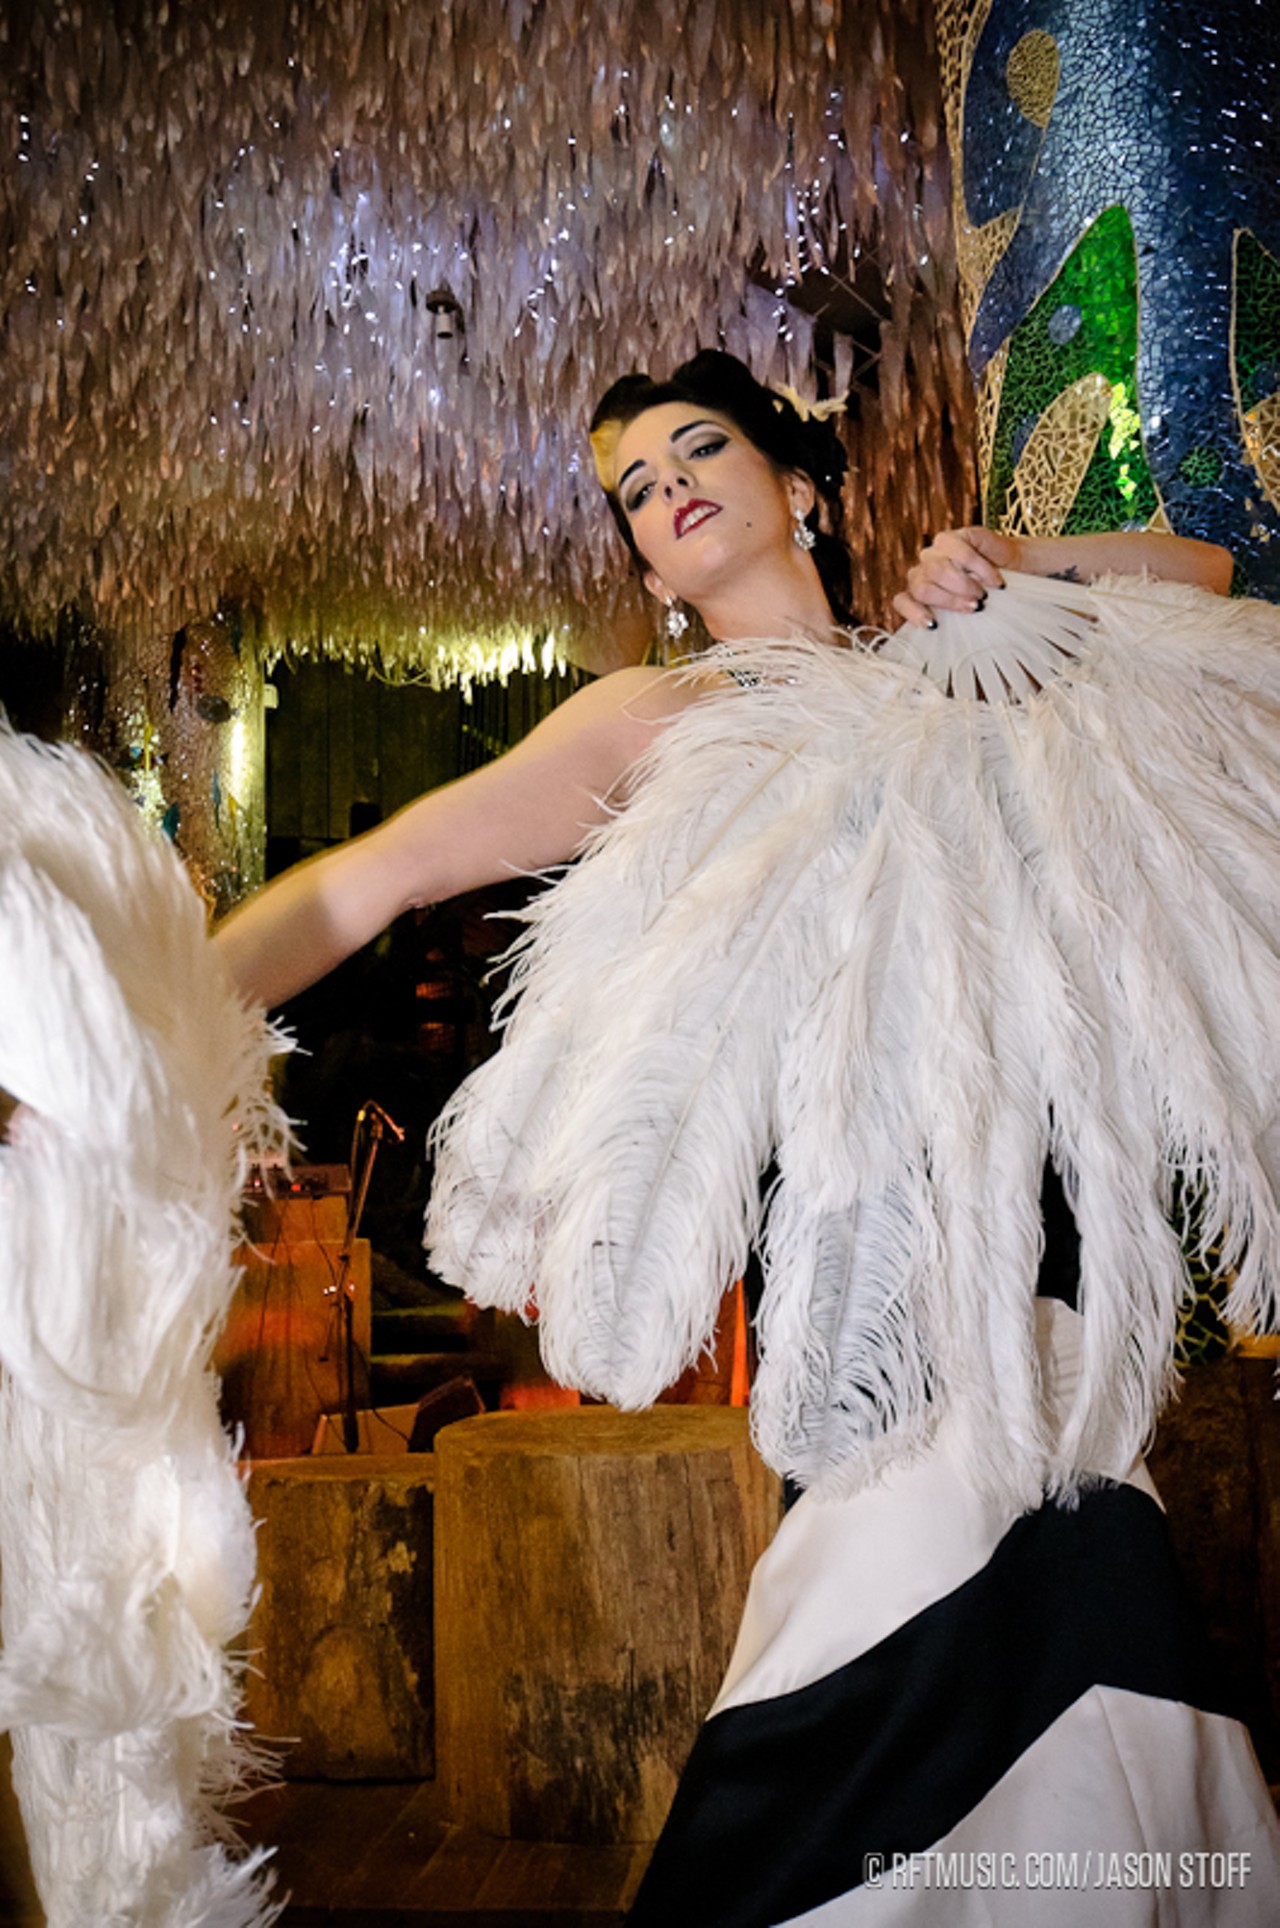 The fine art of burlesque was alive and well at the City Museum.